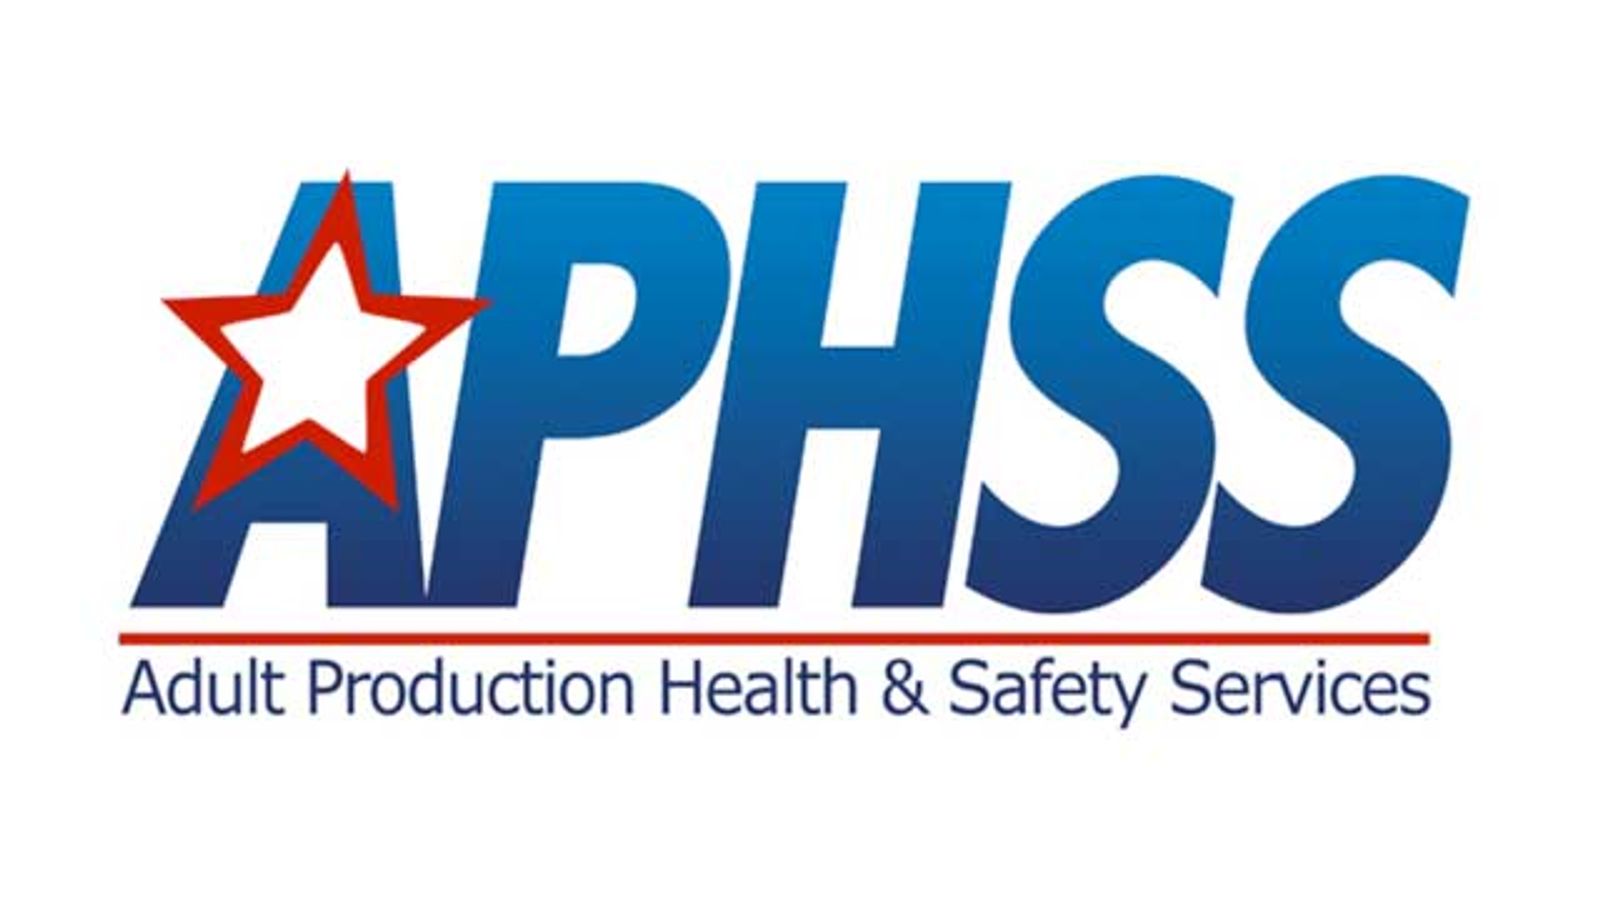 Update on Performers Confirmed Positive for Syphilis